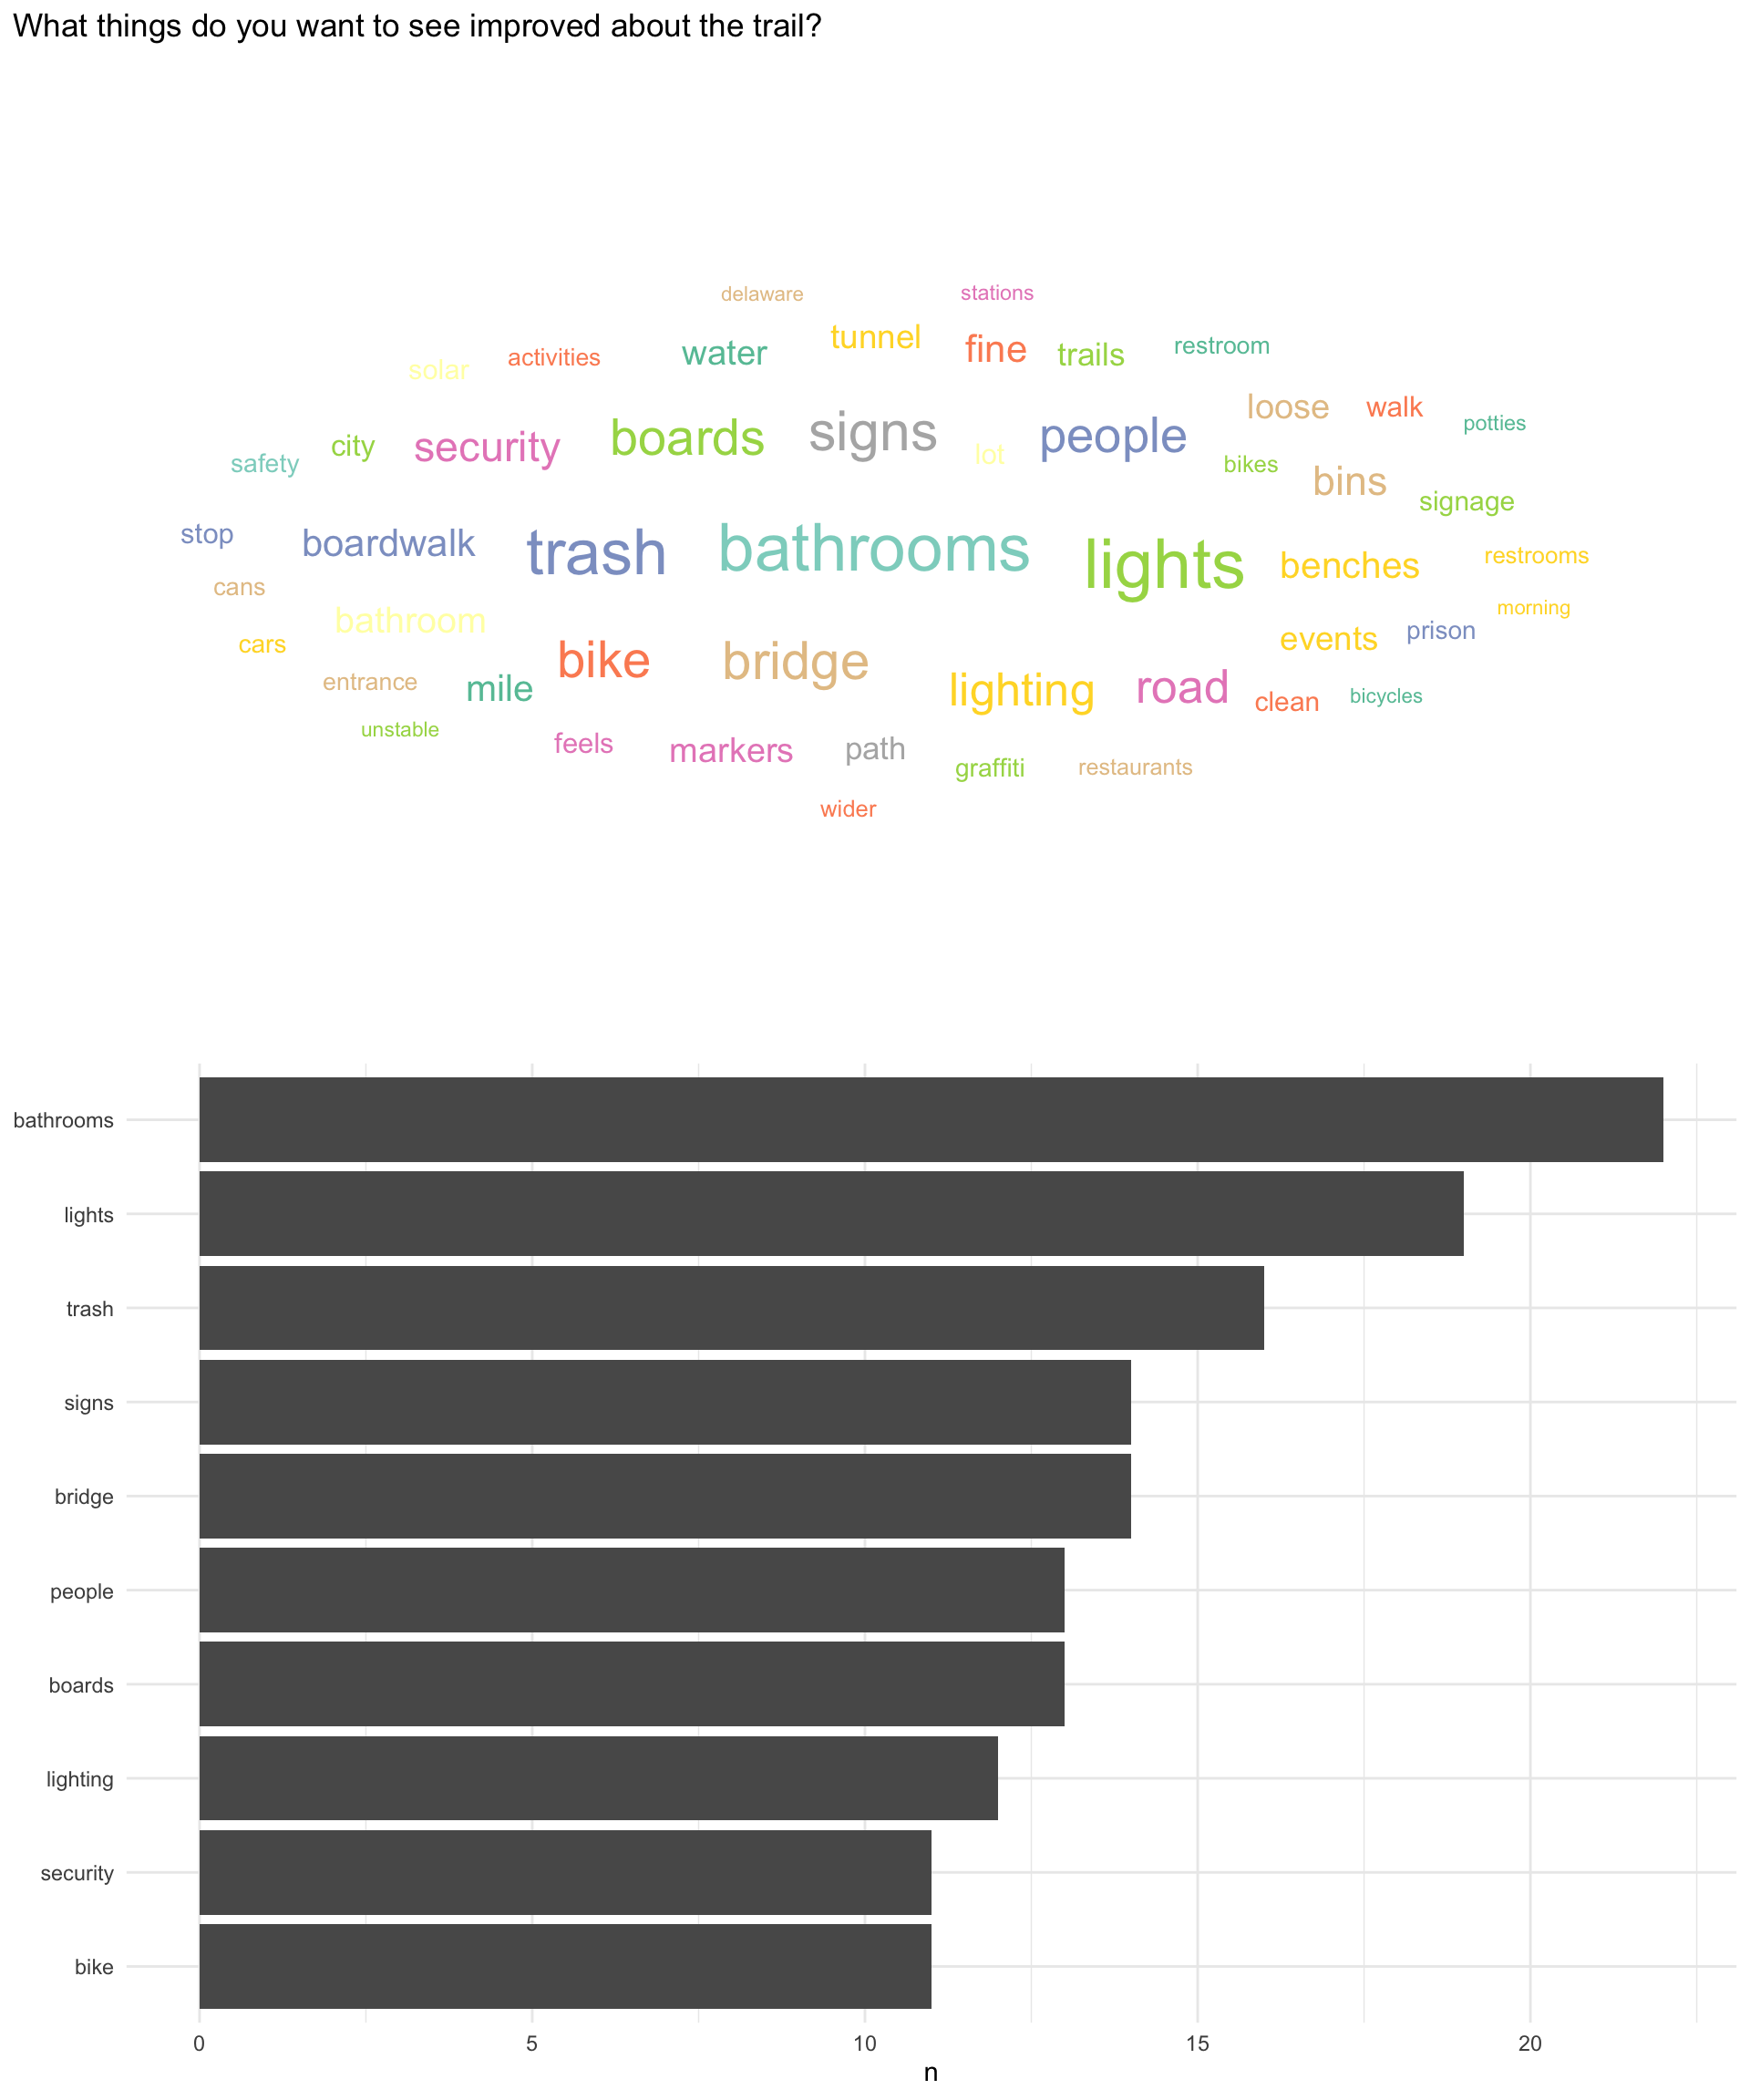 Word cloud for improvements that people want to see for the trail (Detail)